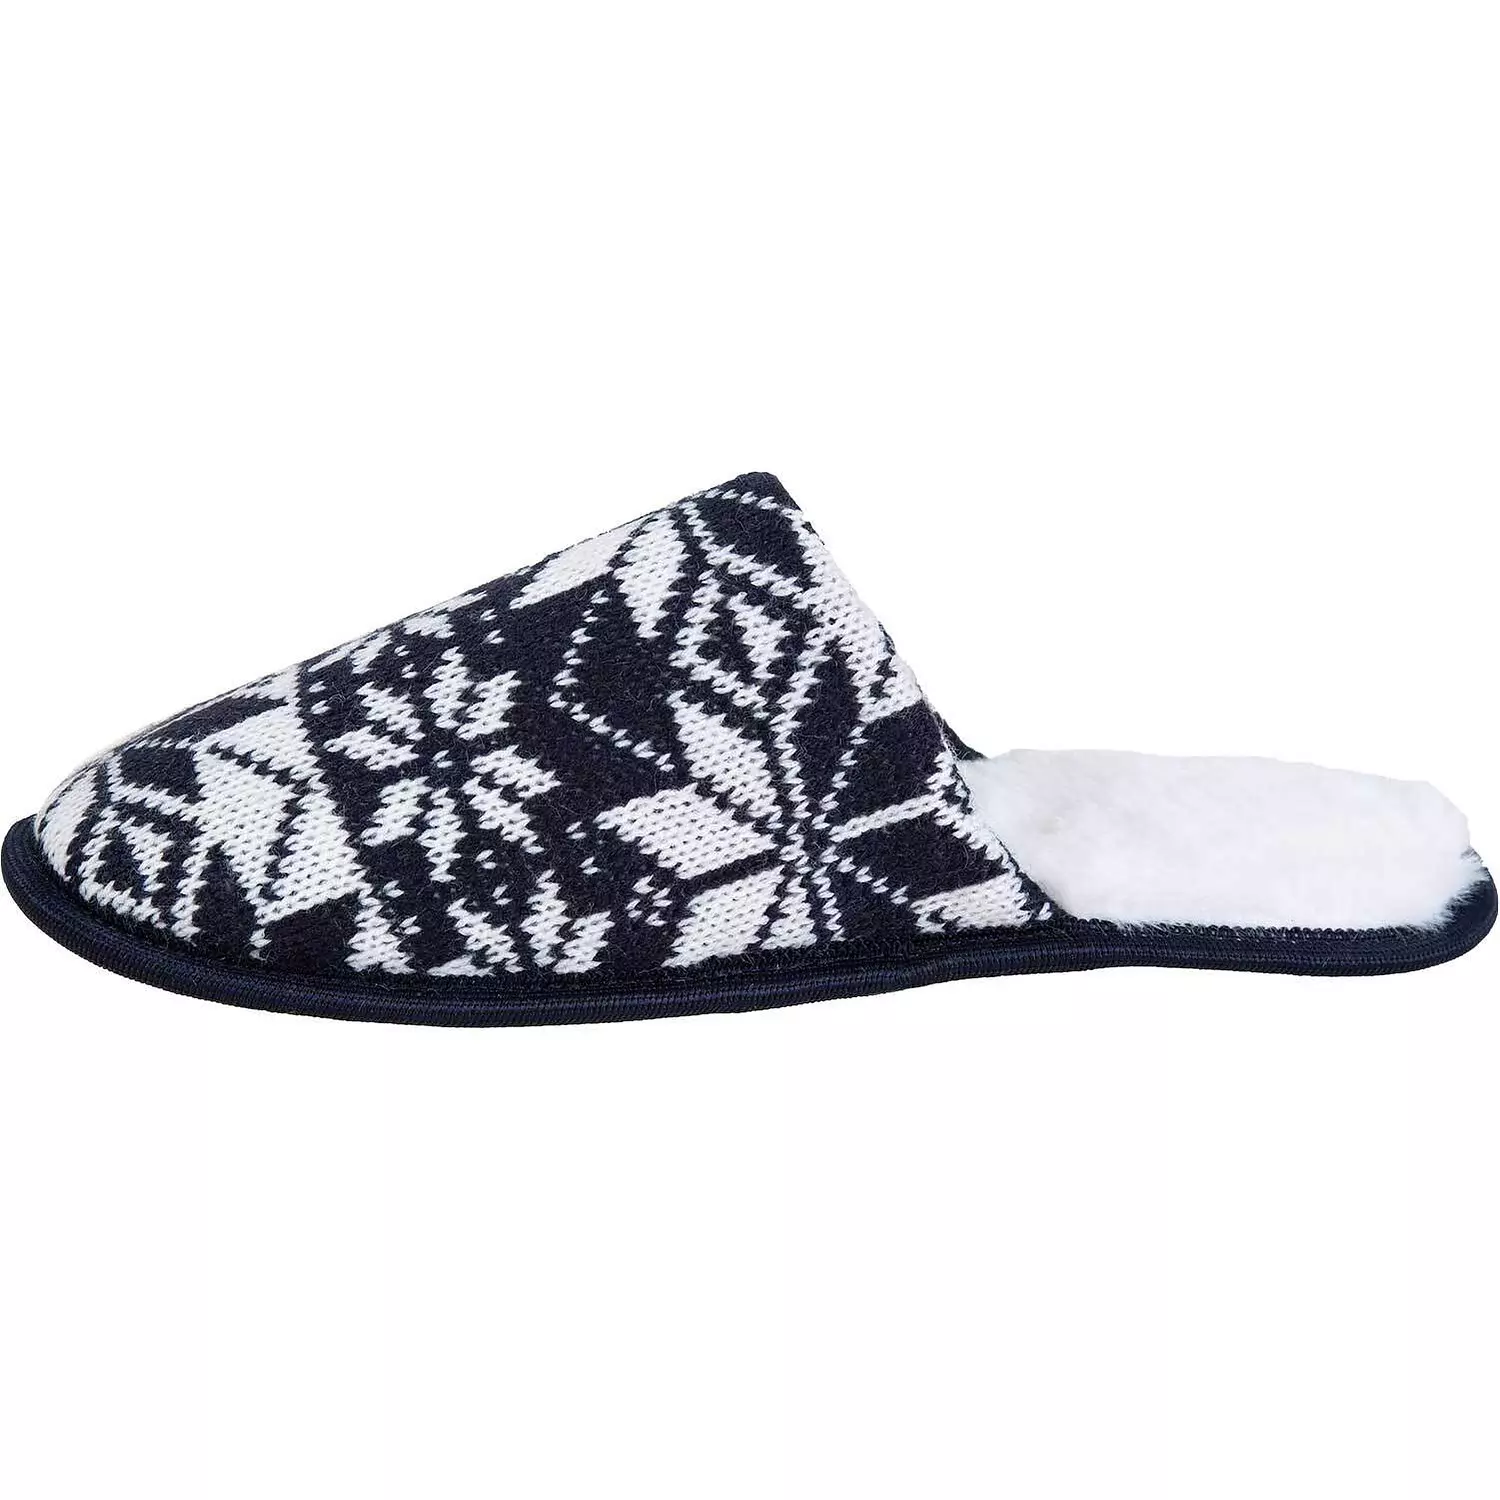 Fair isle knit slipper with faux fur inner sole, small Colour: black. Size: s | Rossy